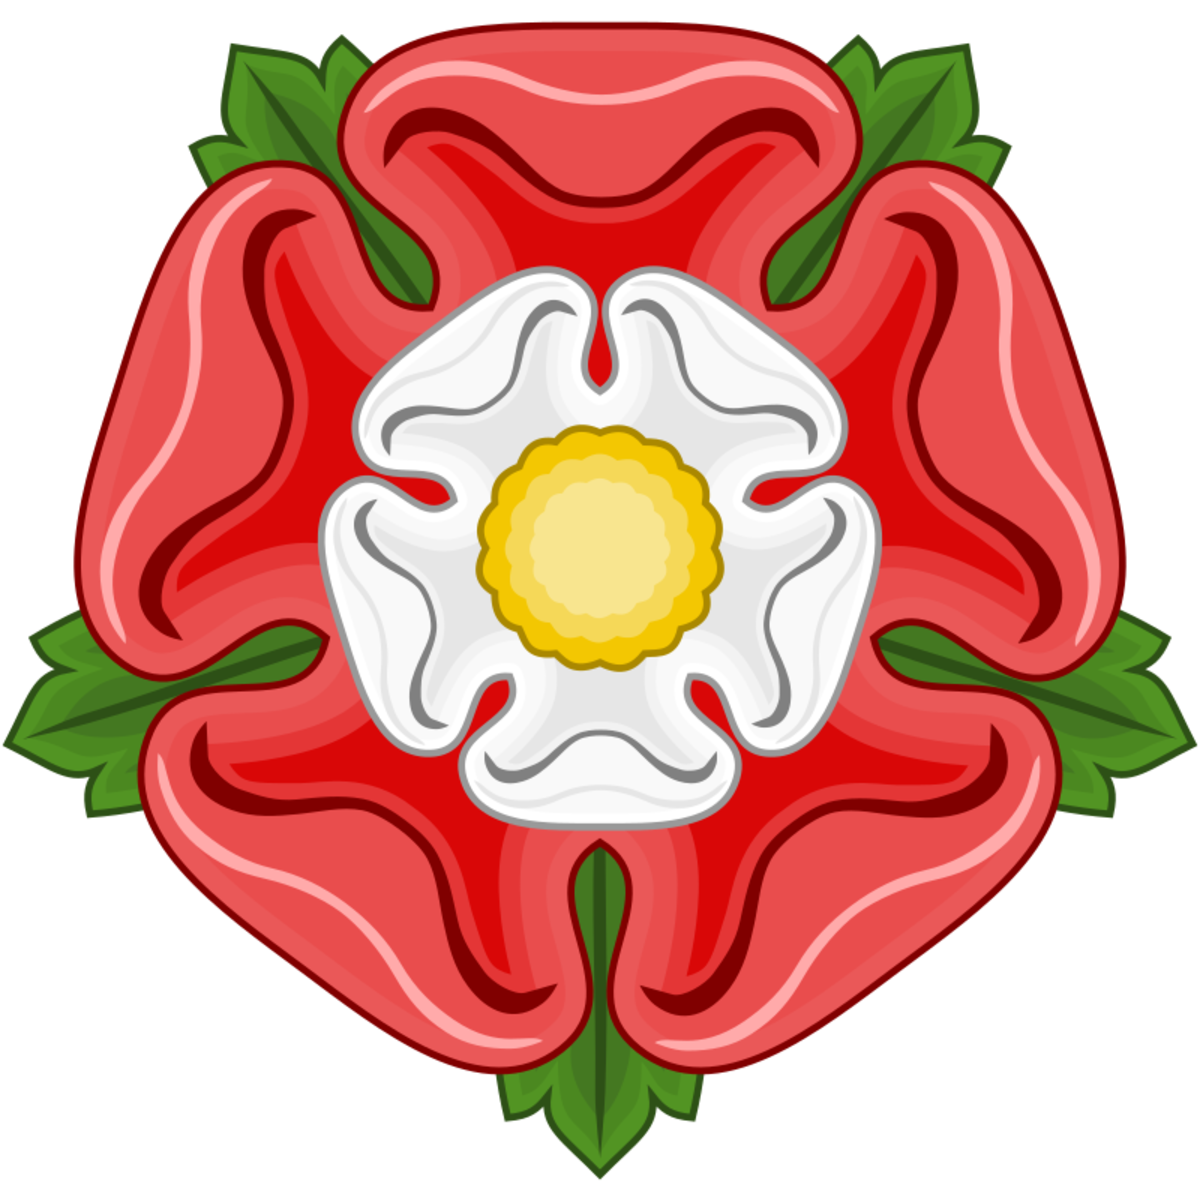 The sigil of House Tudor contains the red and white rose, signifying the unification of York and Lancaster through the marriage between Henry Tudor and Elizabeth of York.